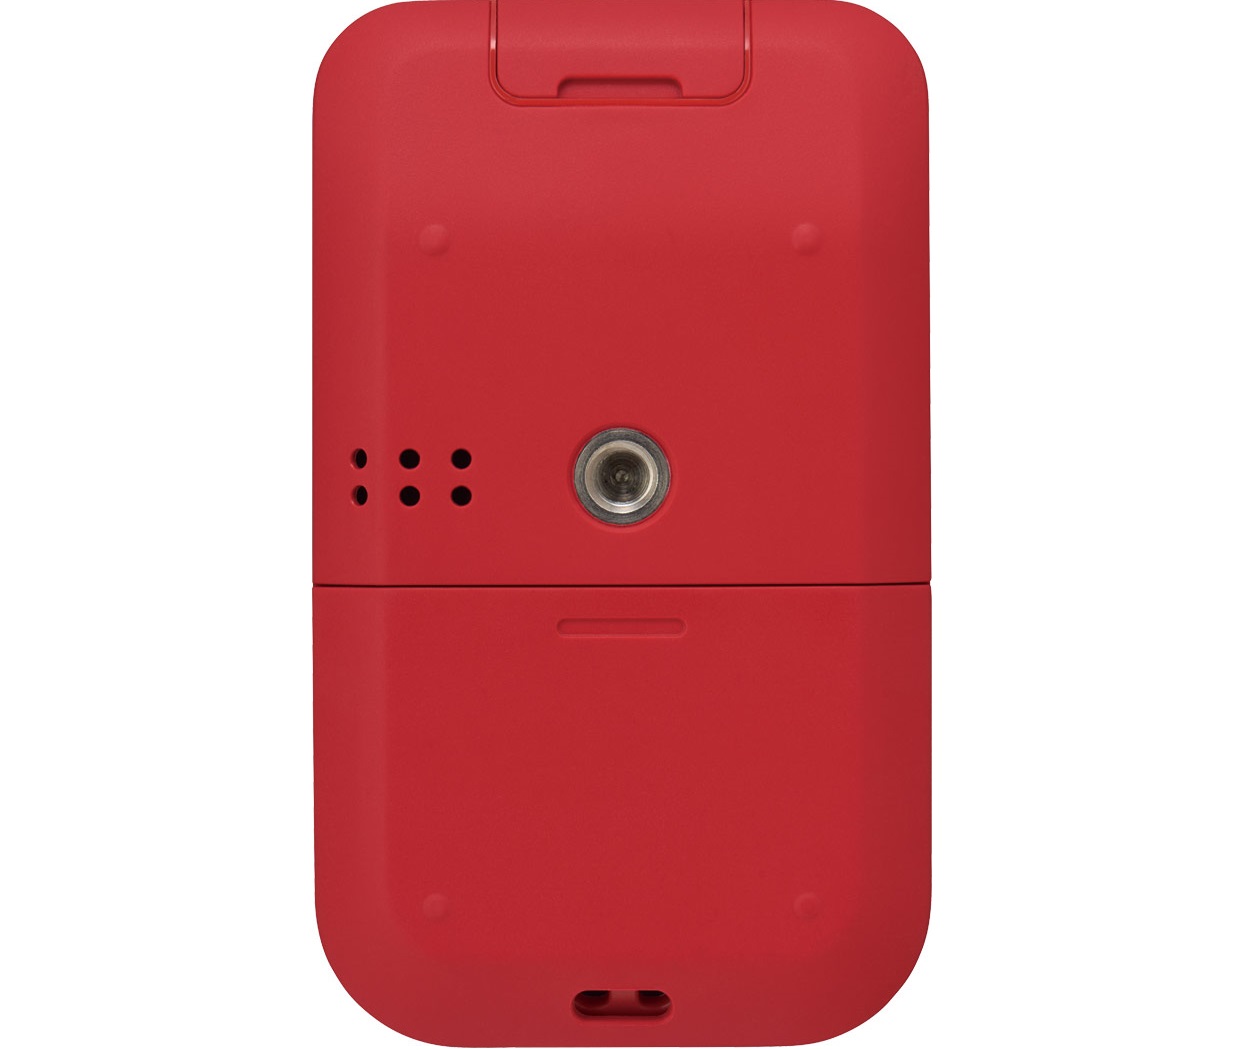 R-07-RD Portable Audio Recorder/Red by Roland